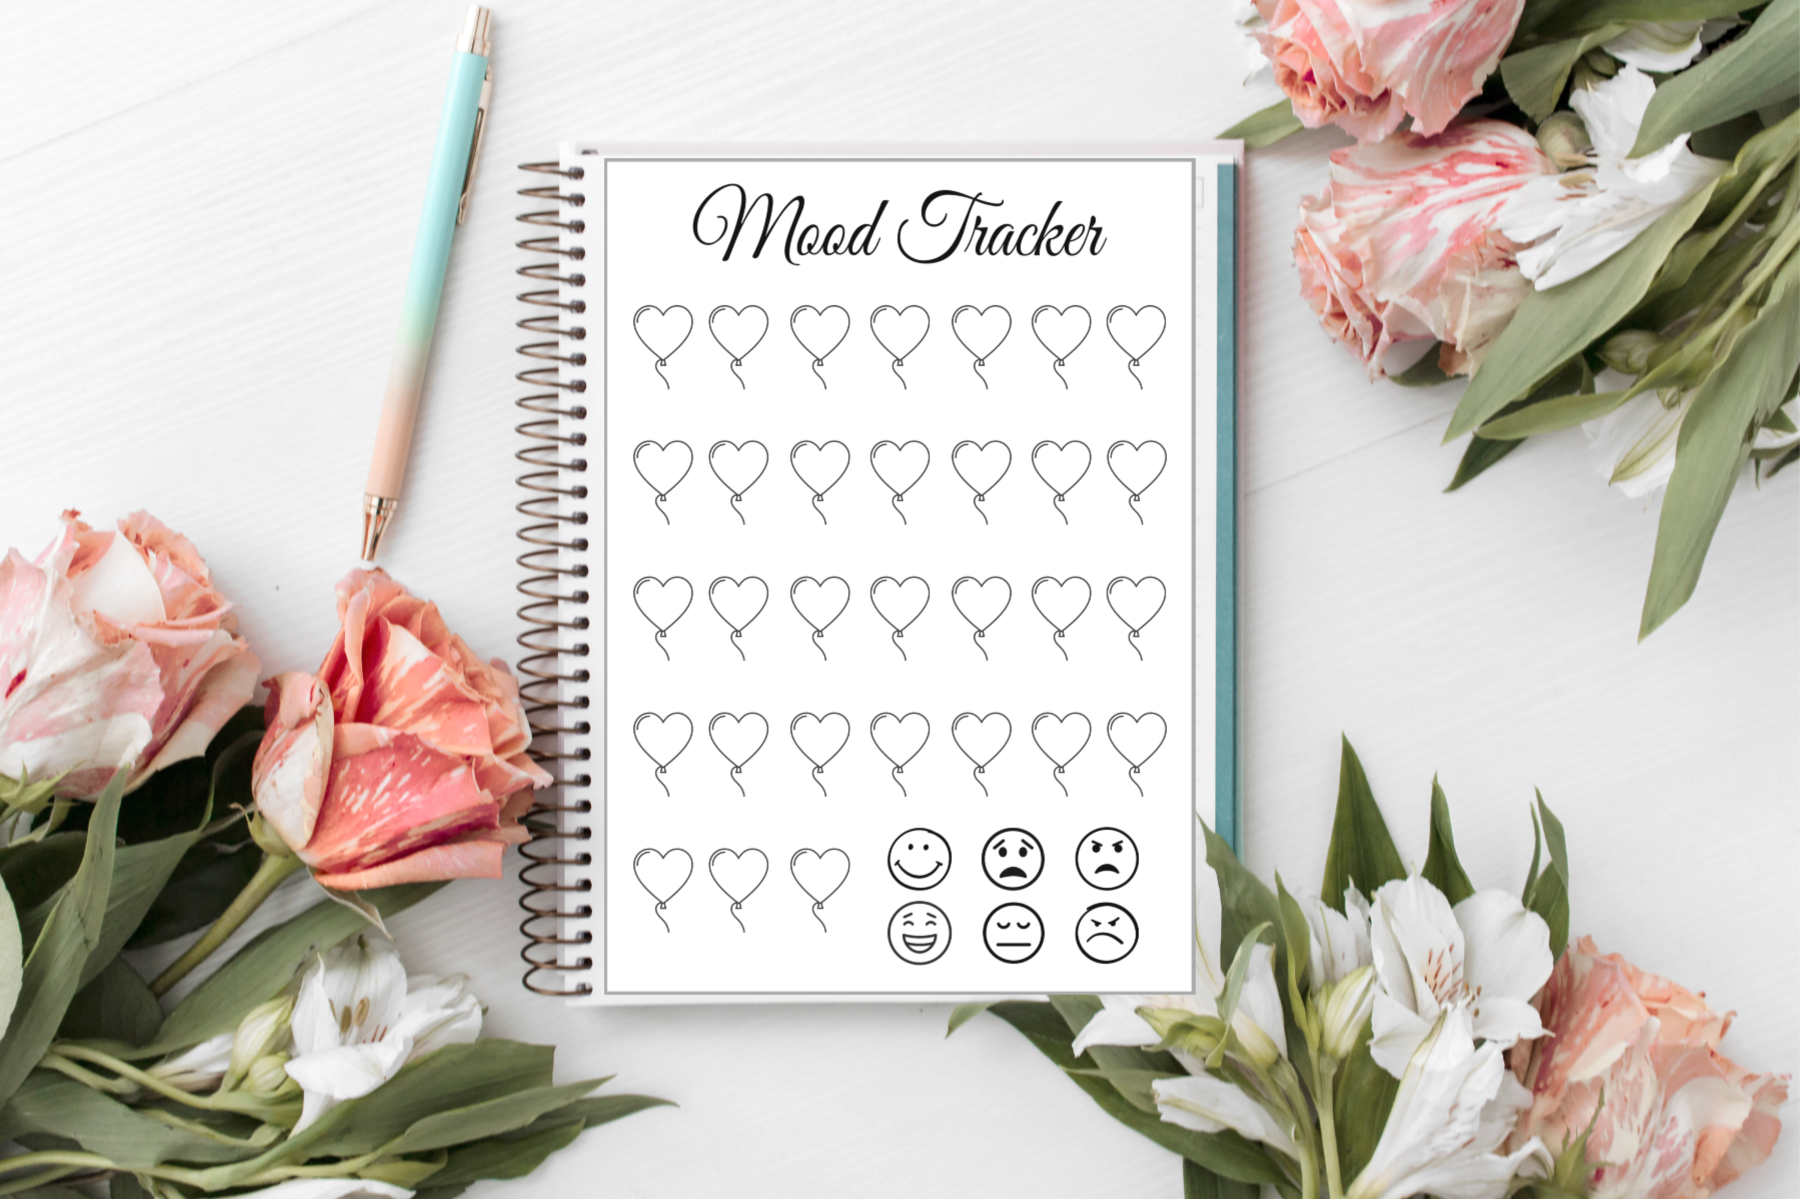 bullet-journal-mood-tracker-ideas-plus-free-printables-the-clever-side